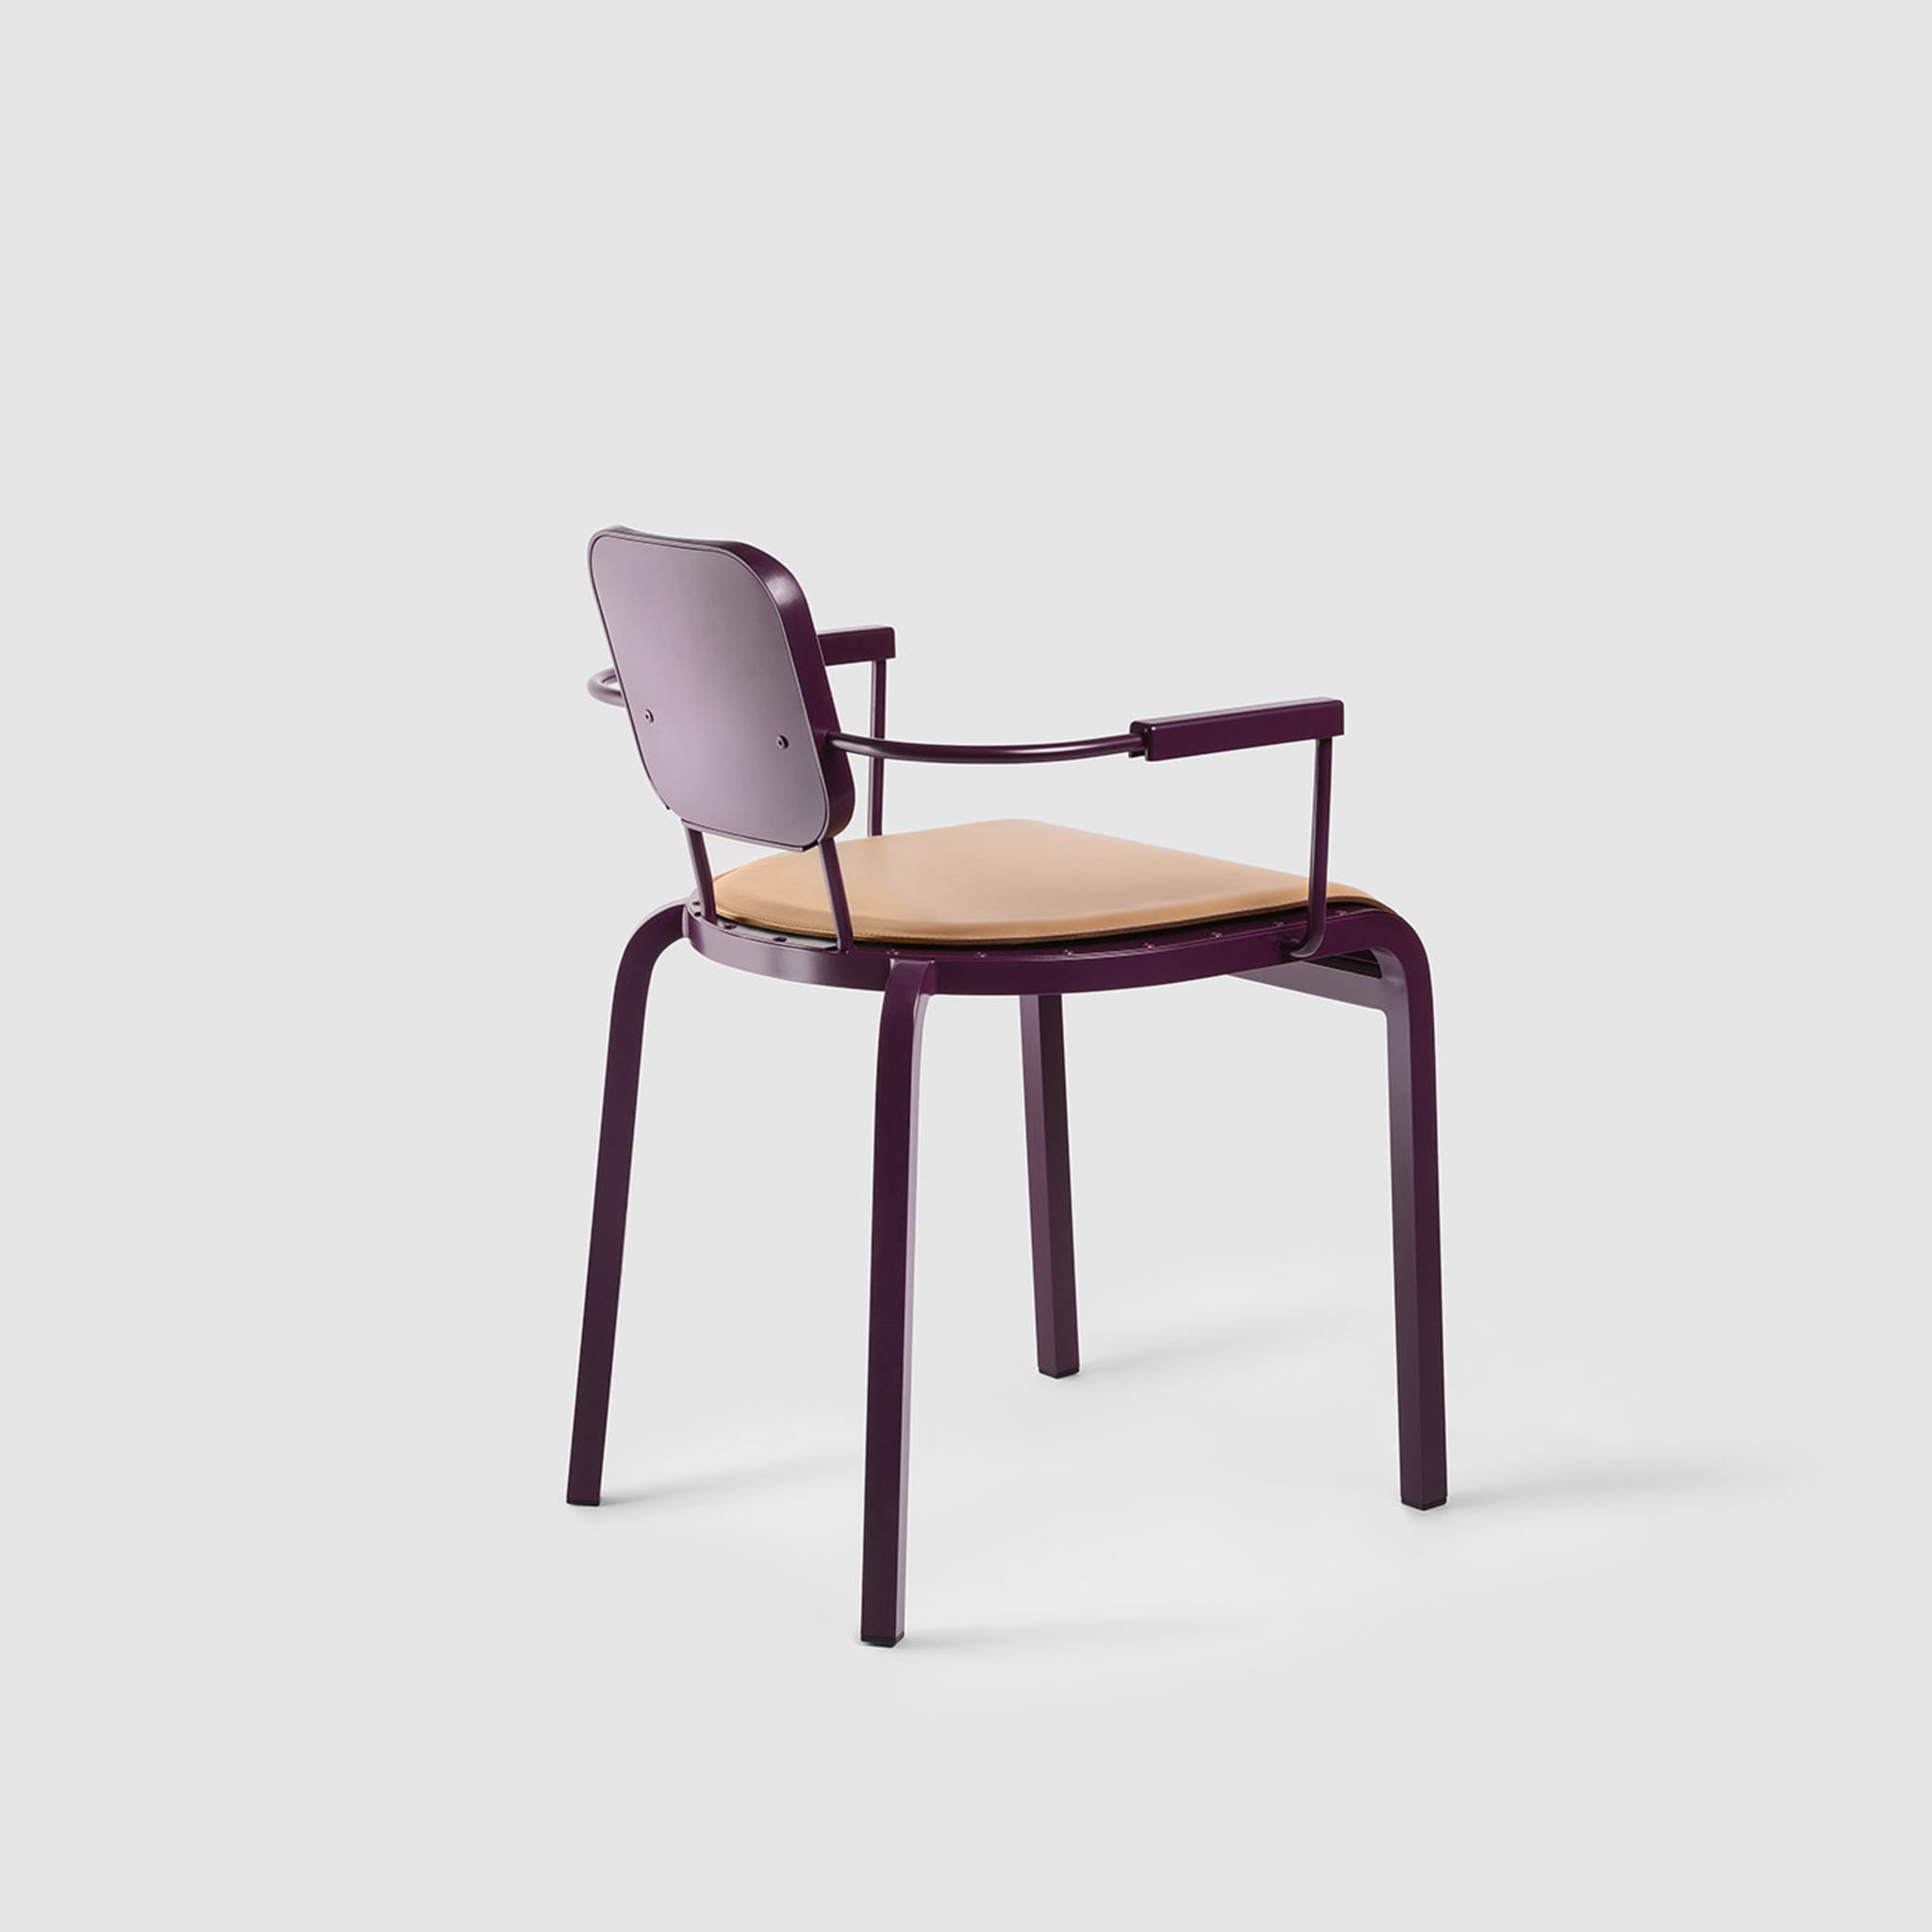 Rock4 Purple Chair with Leather Seat by Marc Sadler - Vue alternative 1